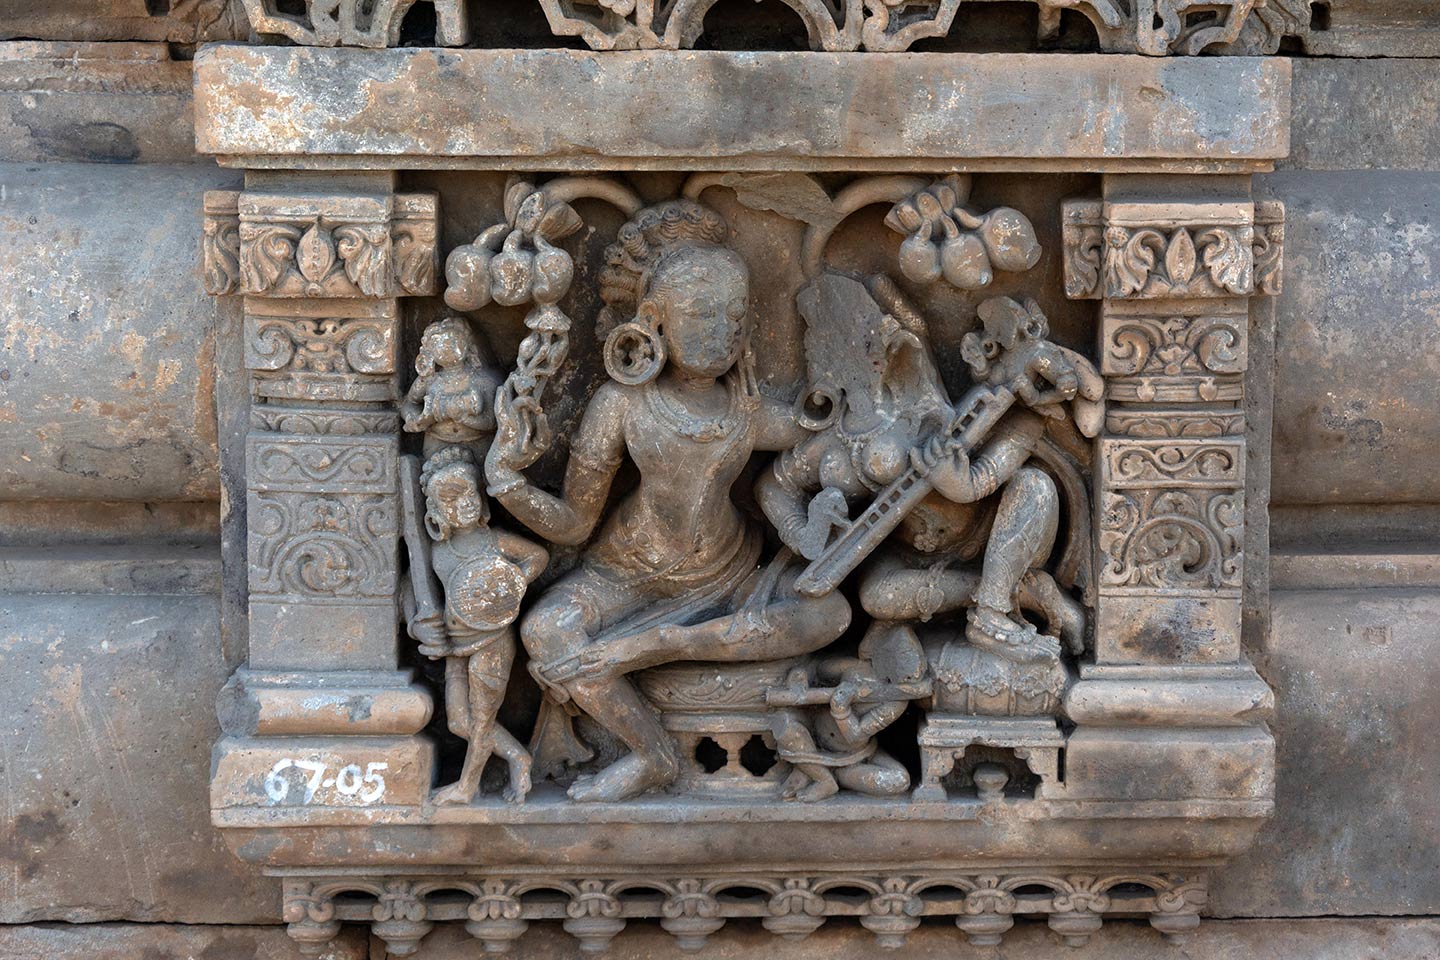 The central male figure and female figures are enjoying a musical concert in a grove. They are seated on circular raised seats, and the male is seated in the lalitasana pose. The female figure is leaning towards the male and playing a stringed musical instrument (likely a veena). They are surrounded by four smaller figures. A male soldier is holding a sword and shield (on the left). One musician is playing the flute (bottom), sitting between the seats.